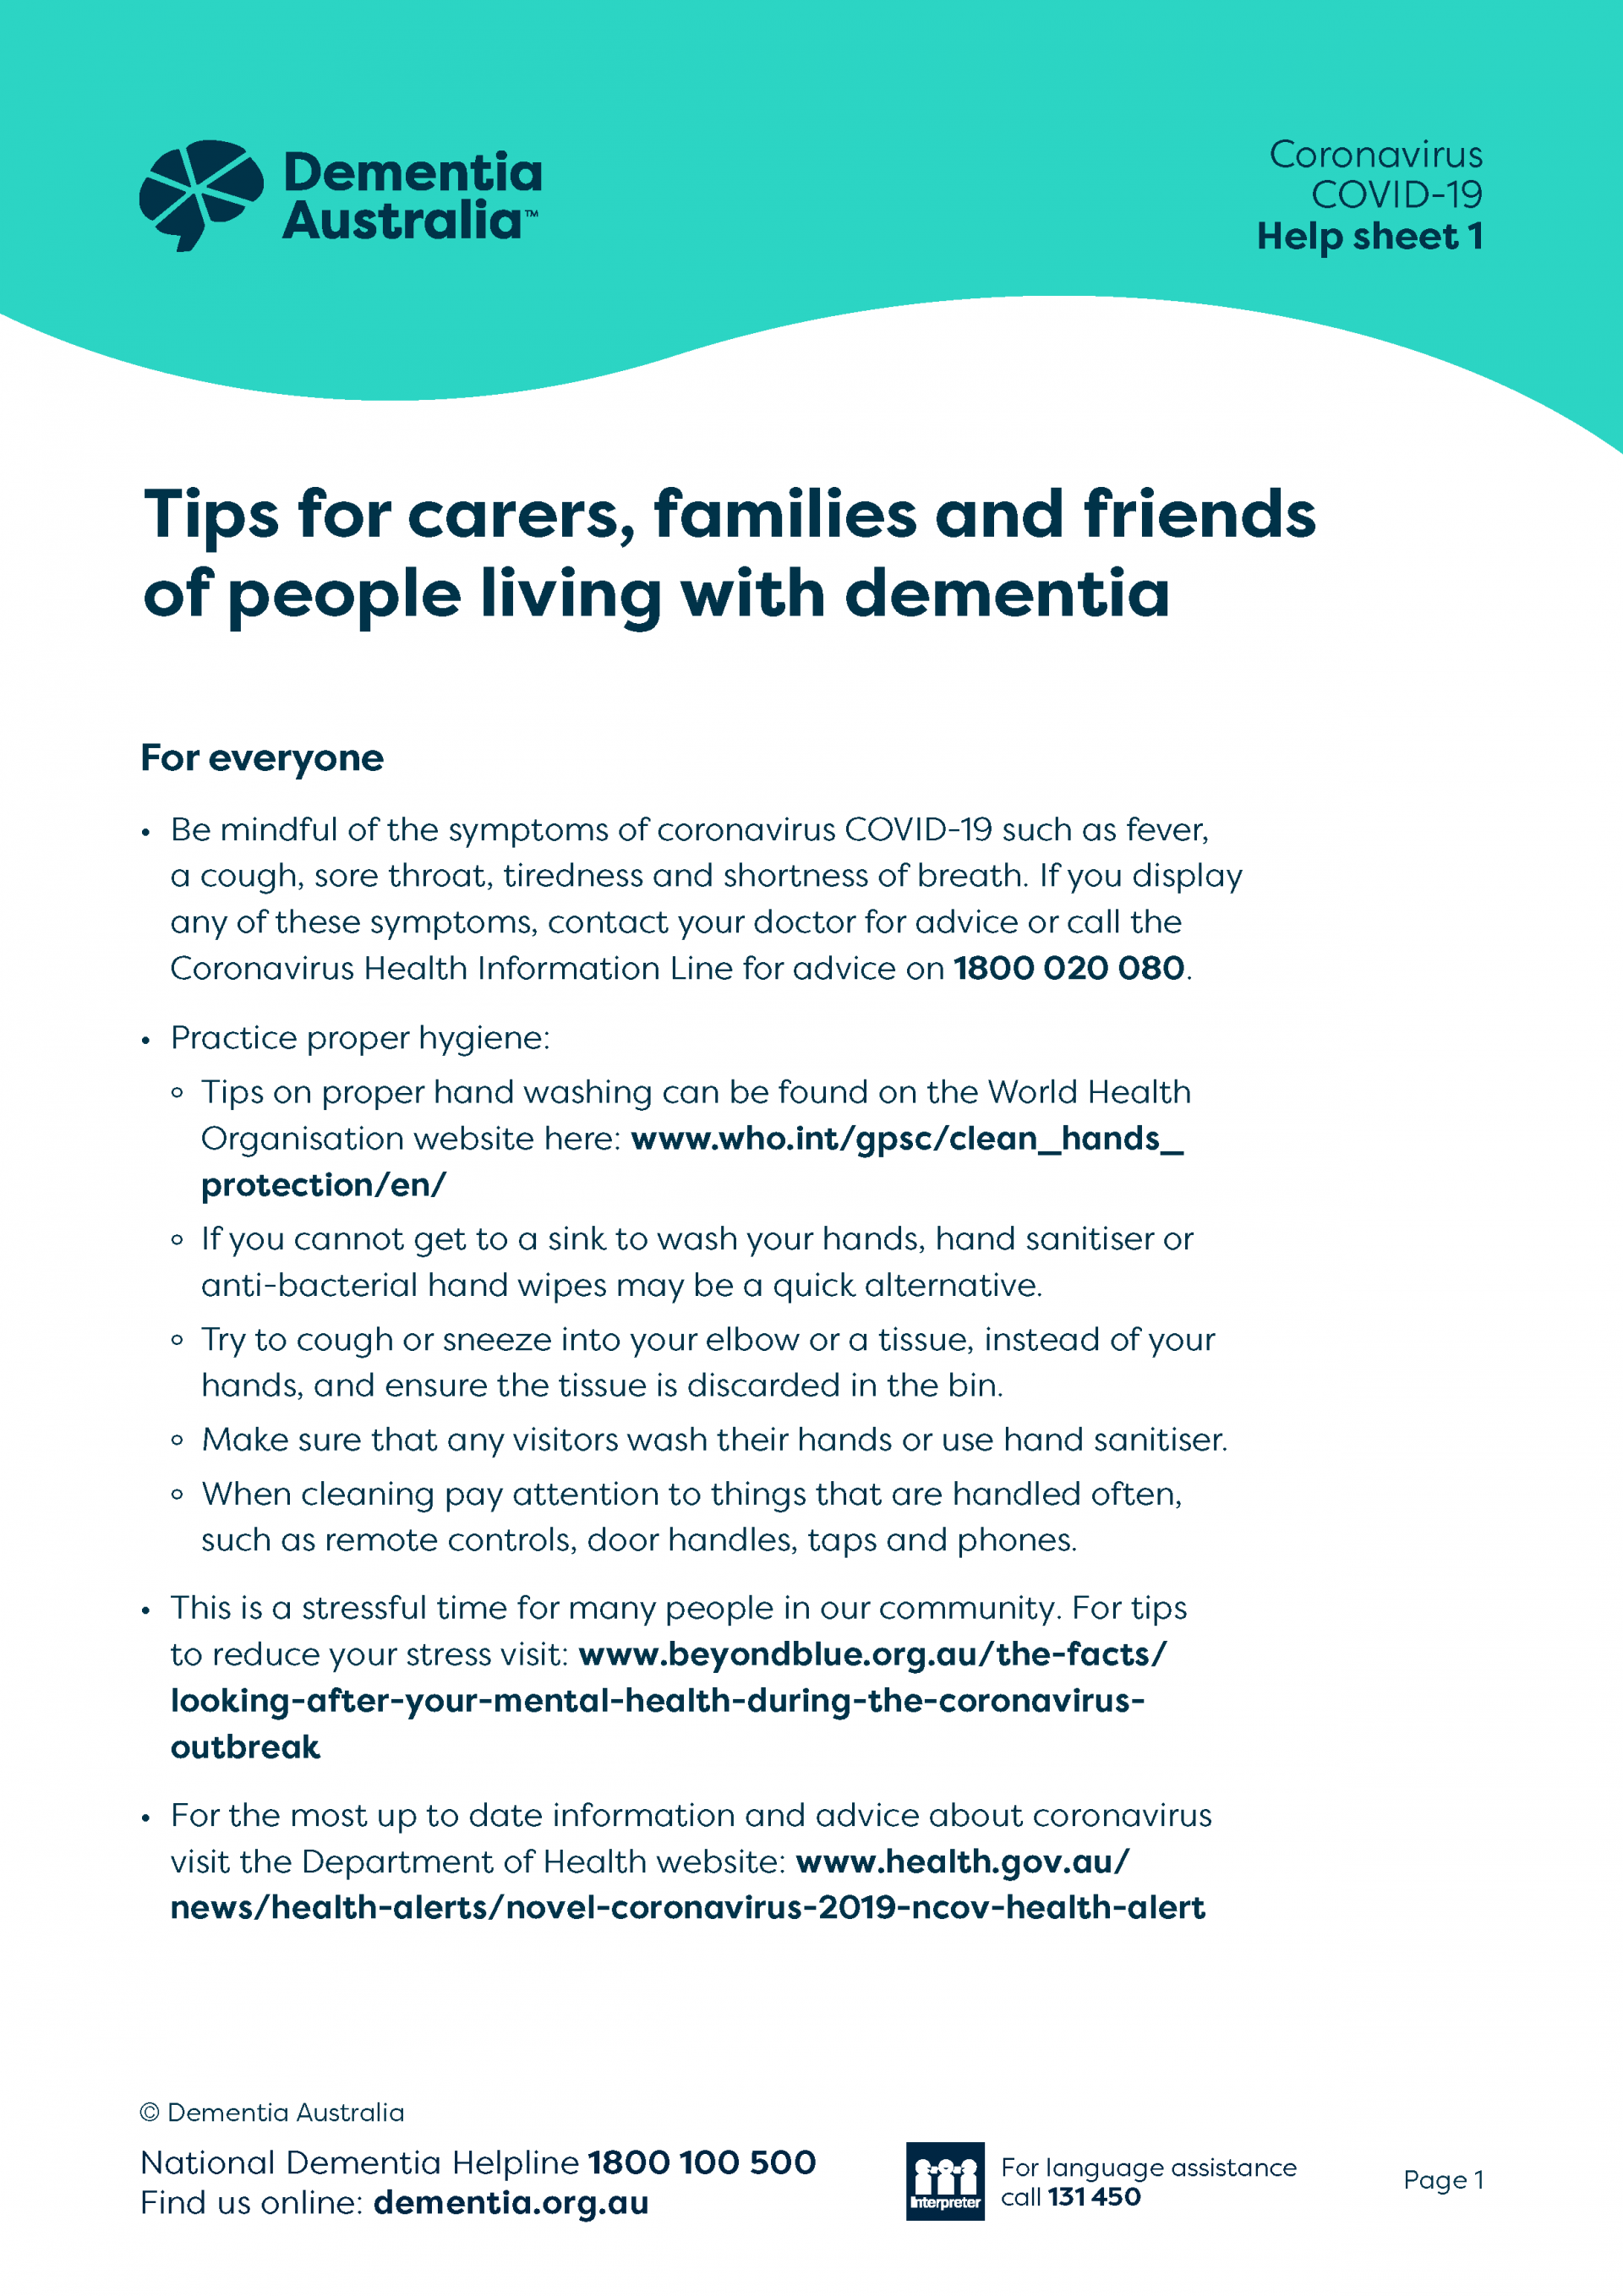 Covid 19 resources for people living with dementia